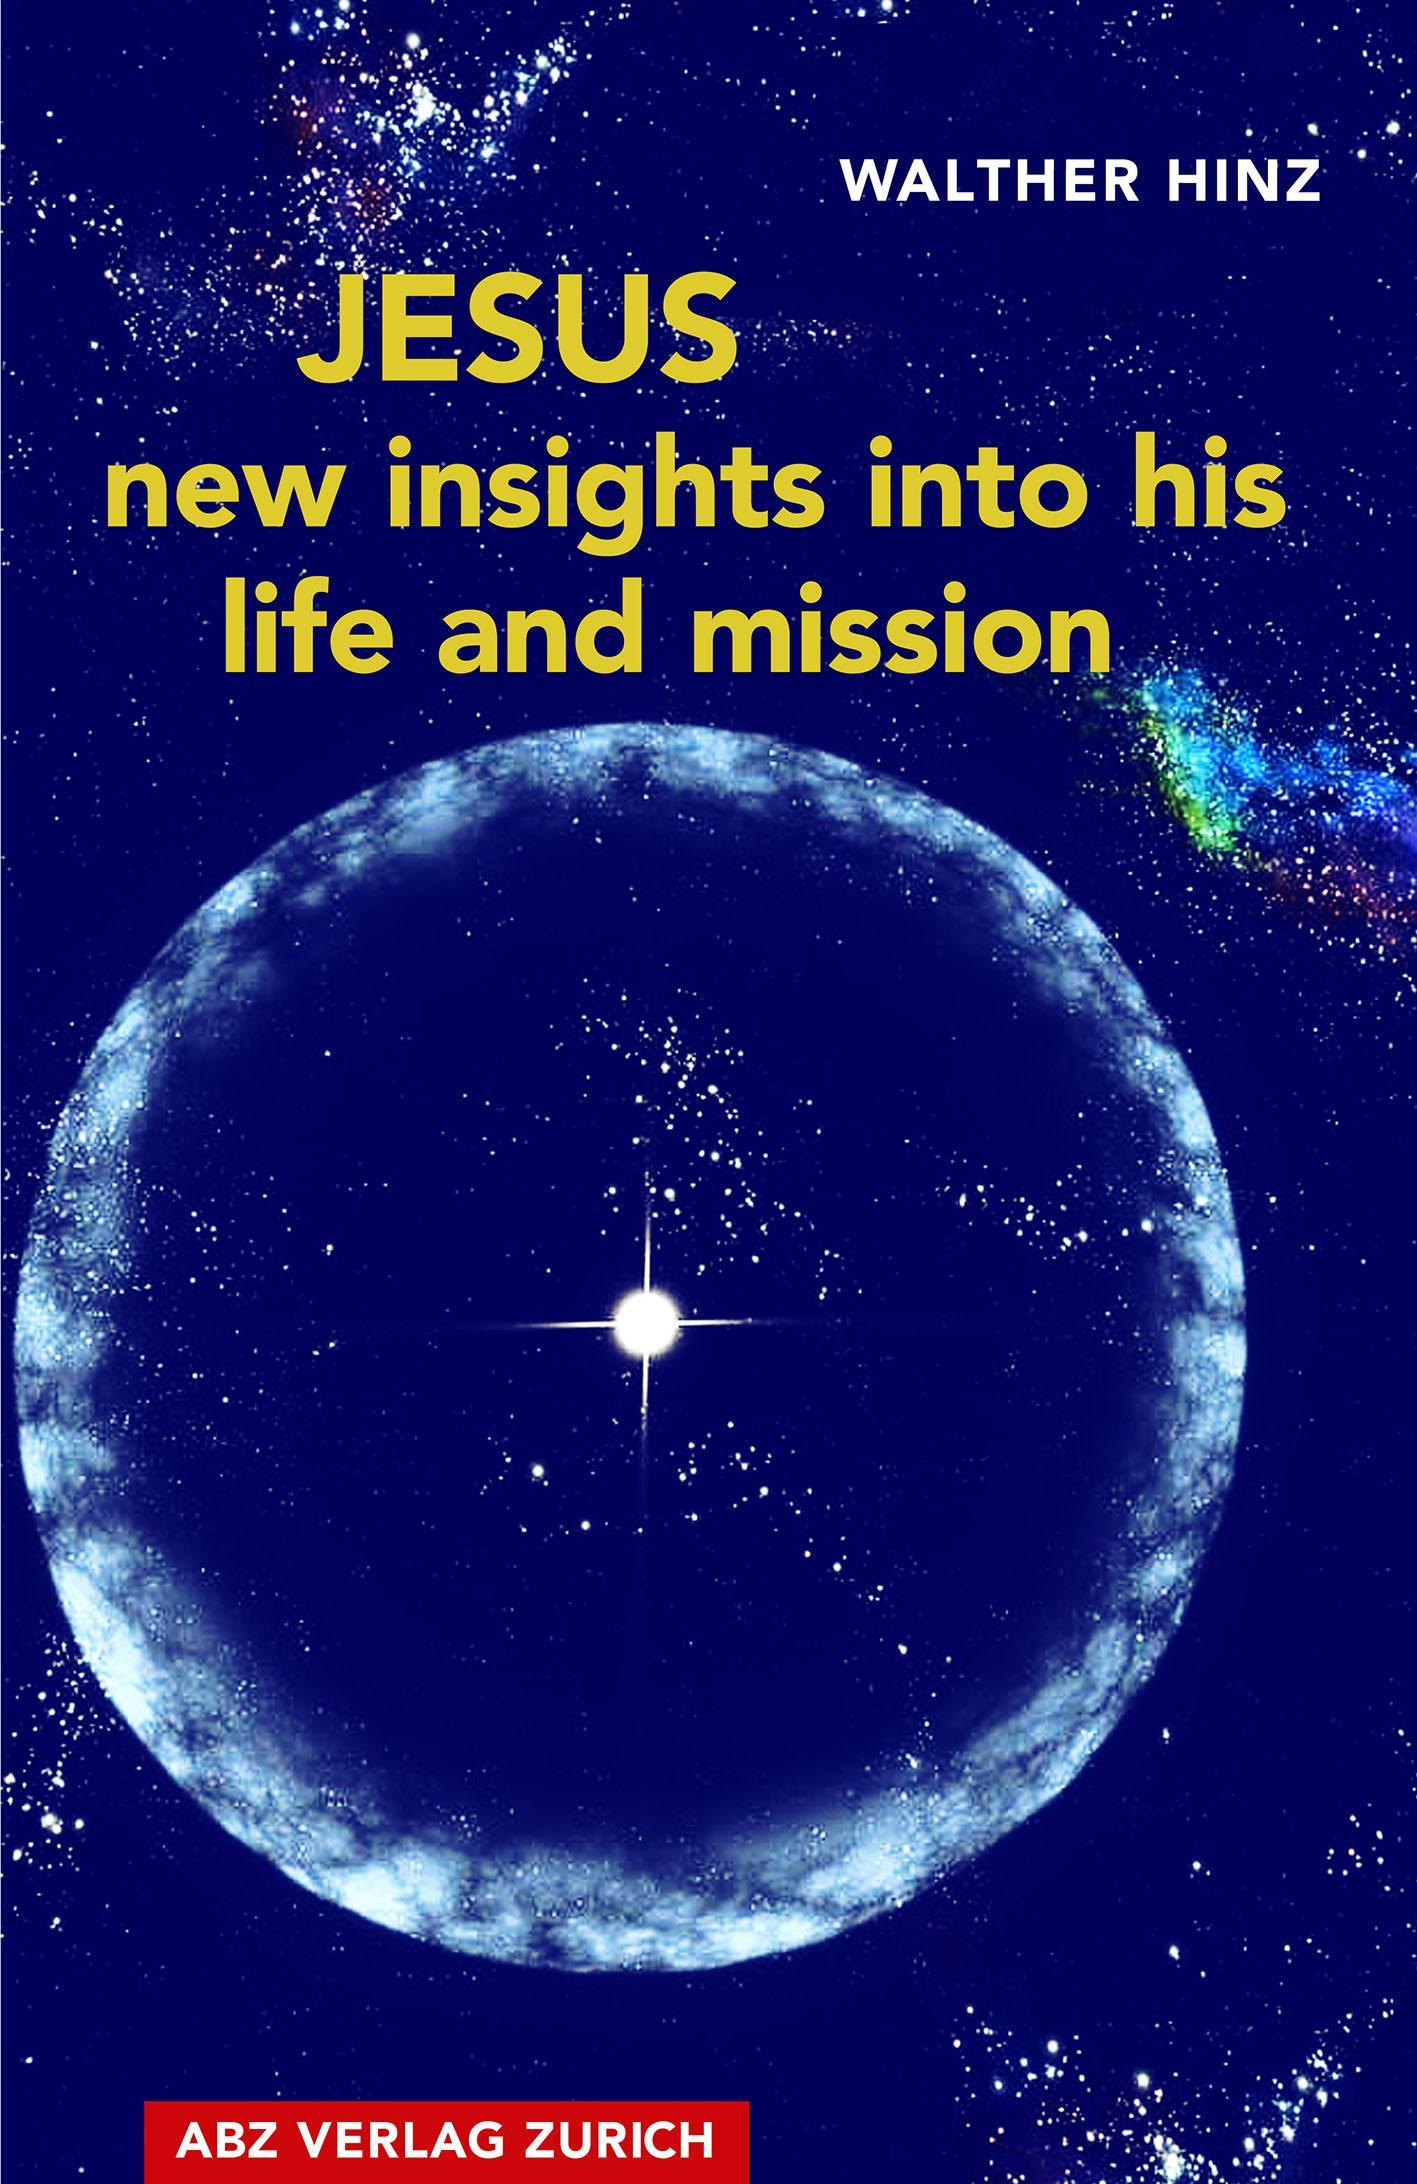 Cover of the Book Jesus – New Insights into His Life and Mission by Walther Hinz, based on Messages from Medium Beatrice Brunner.